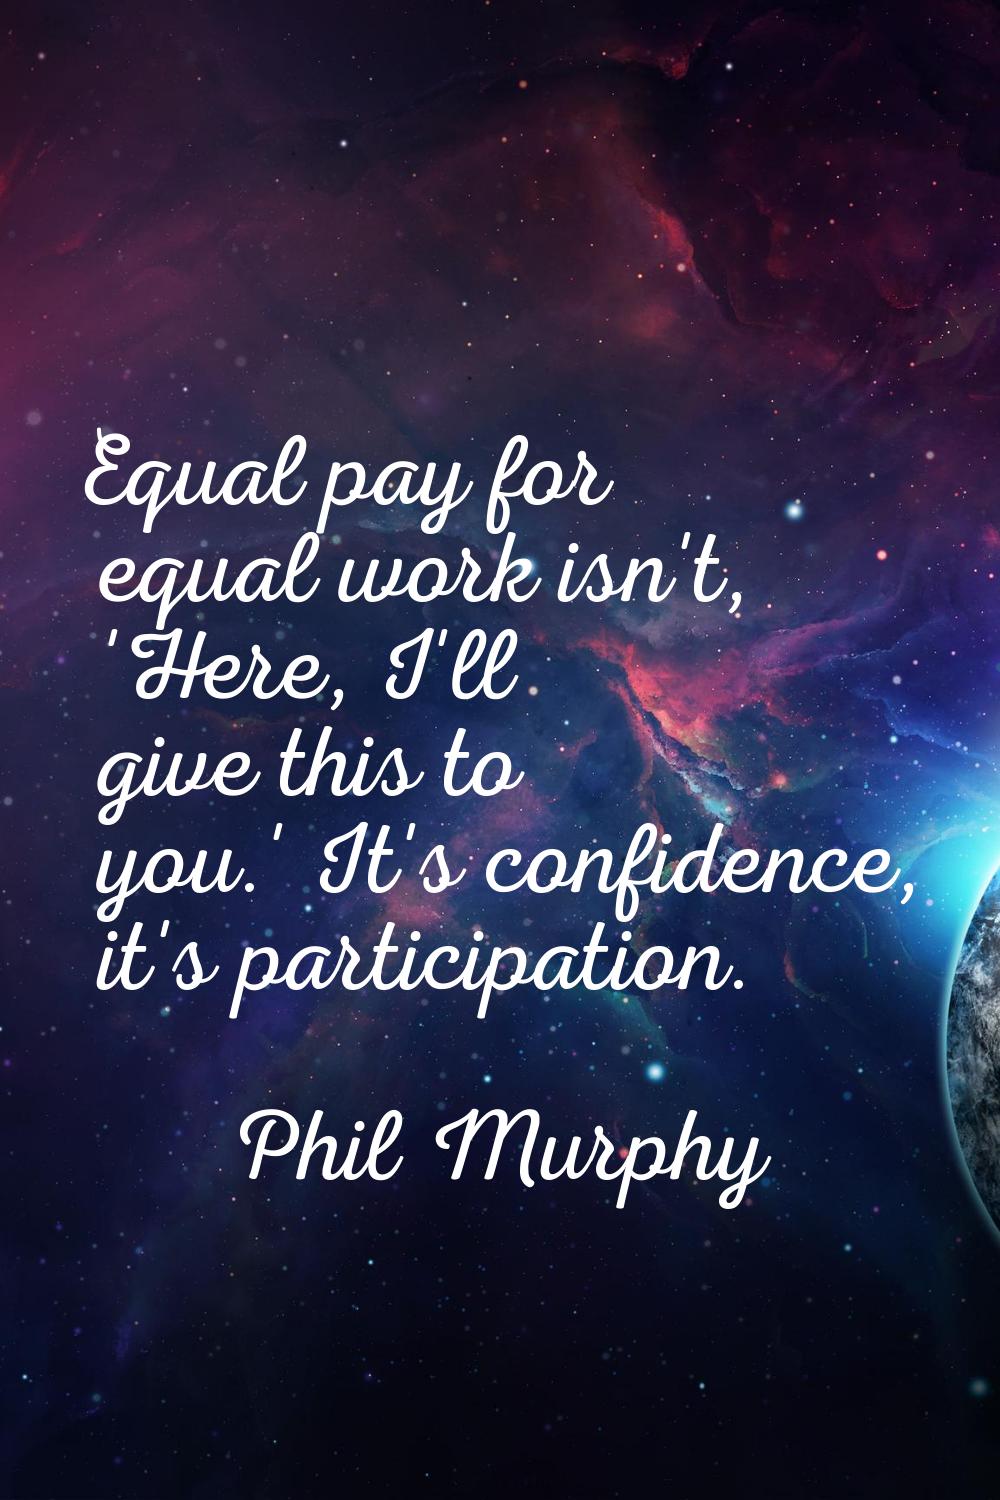 Equal pay for equal work isn't, 'Here, I'll give this to you.' It's confidence, it's participation.